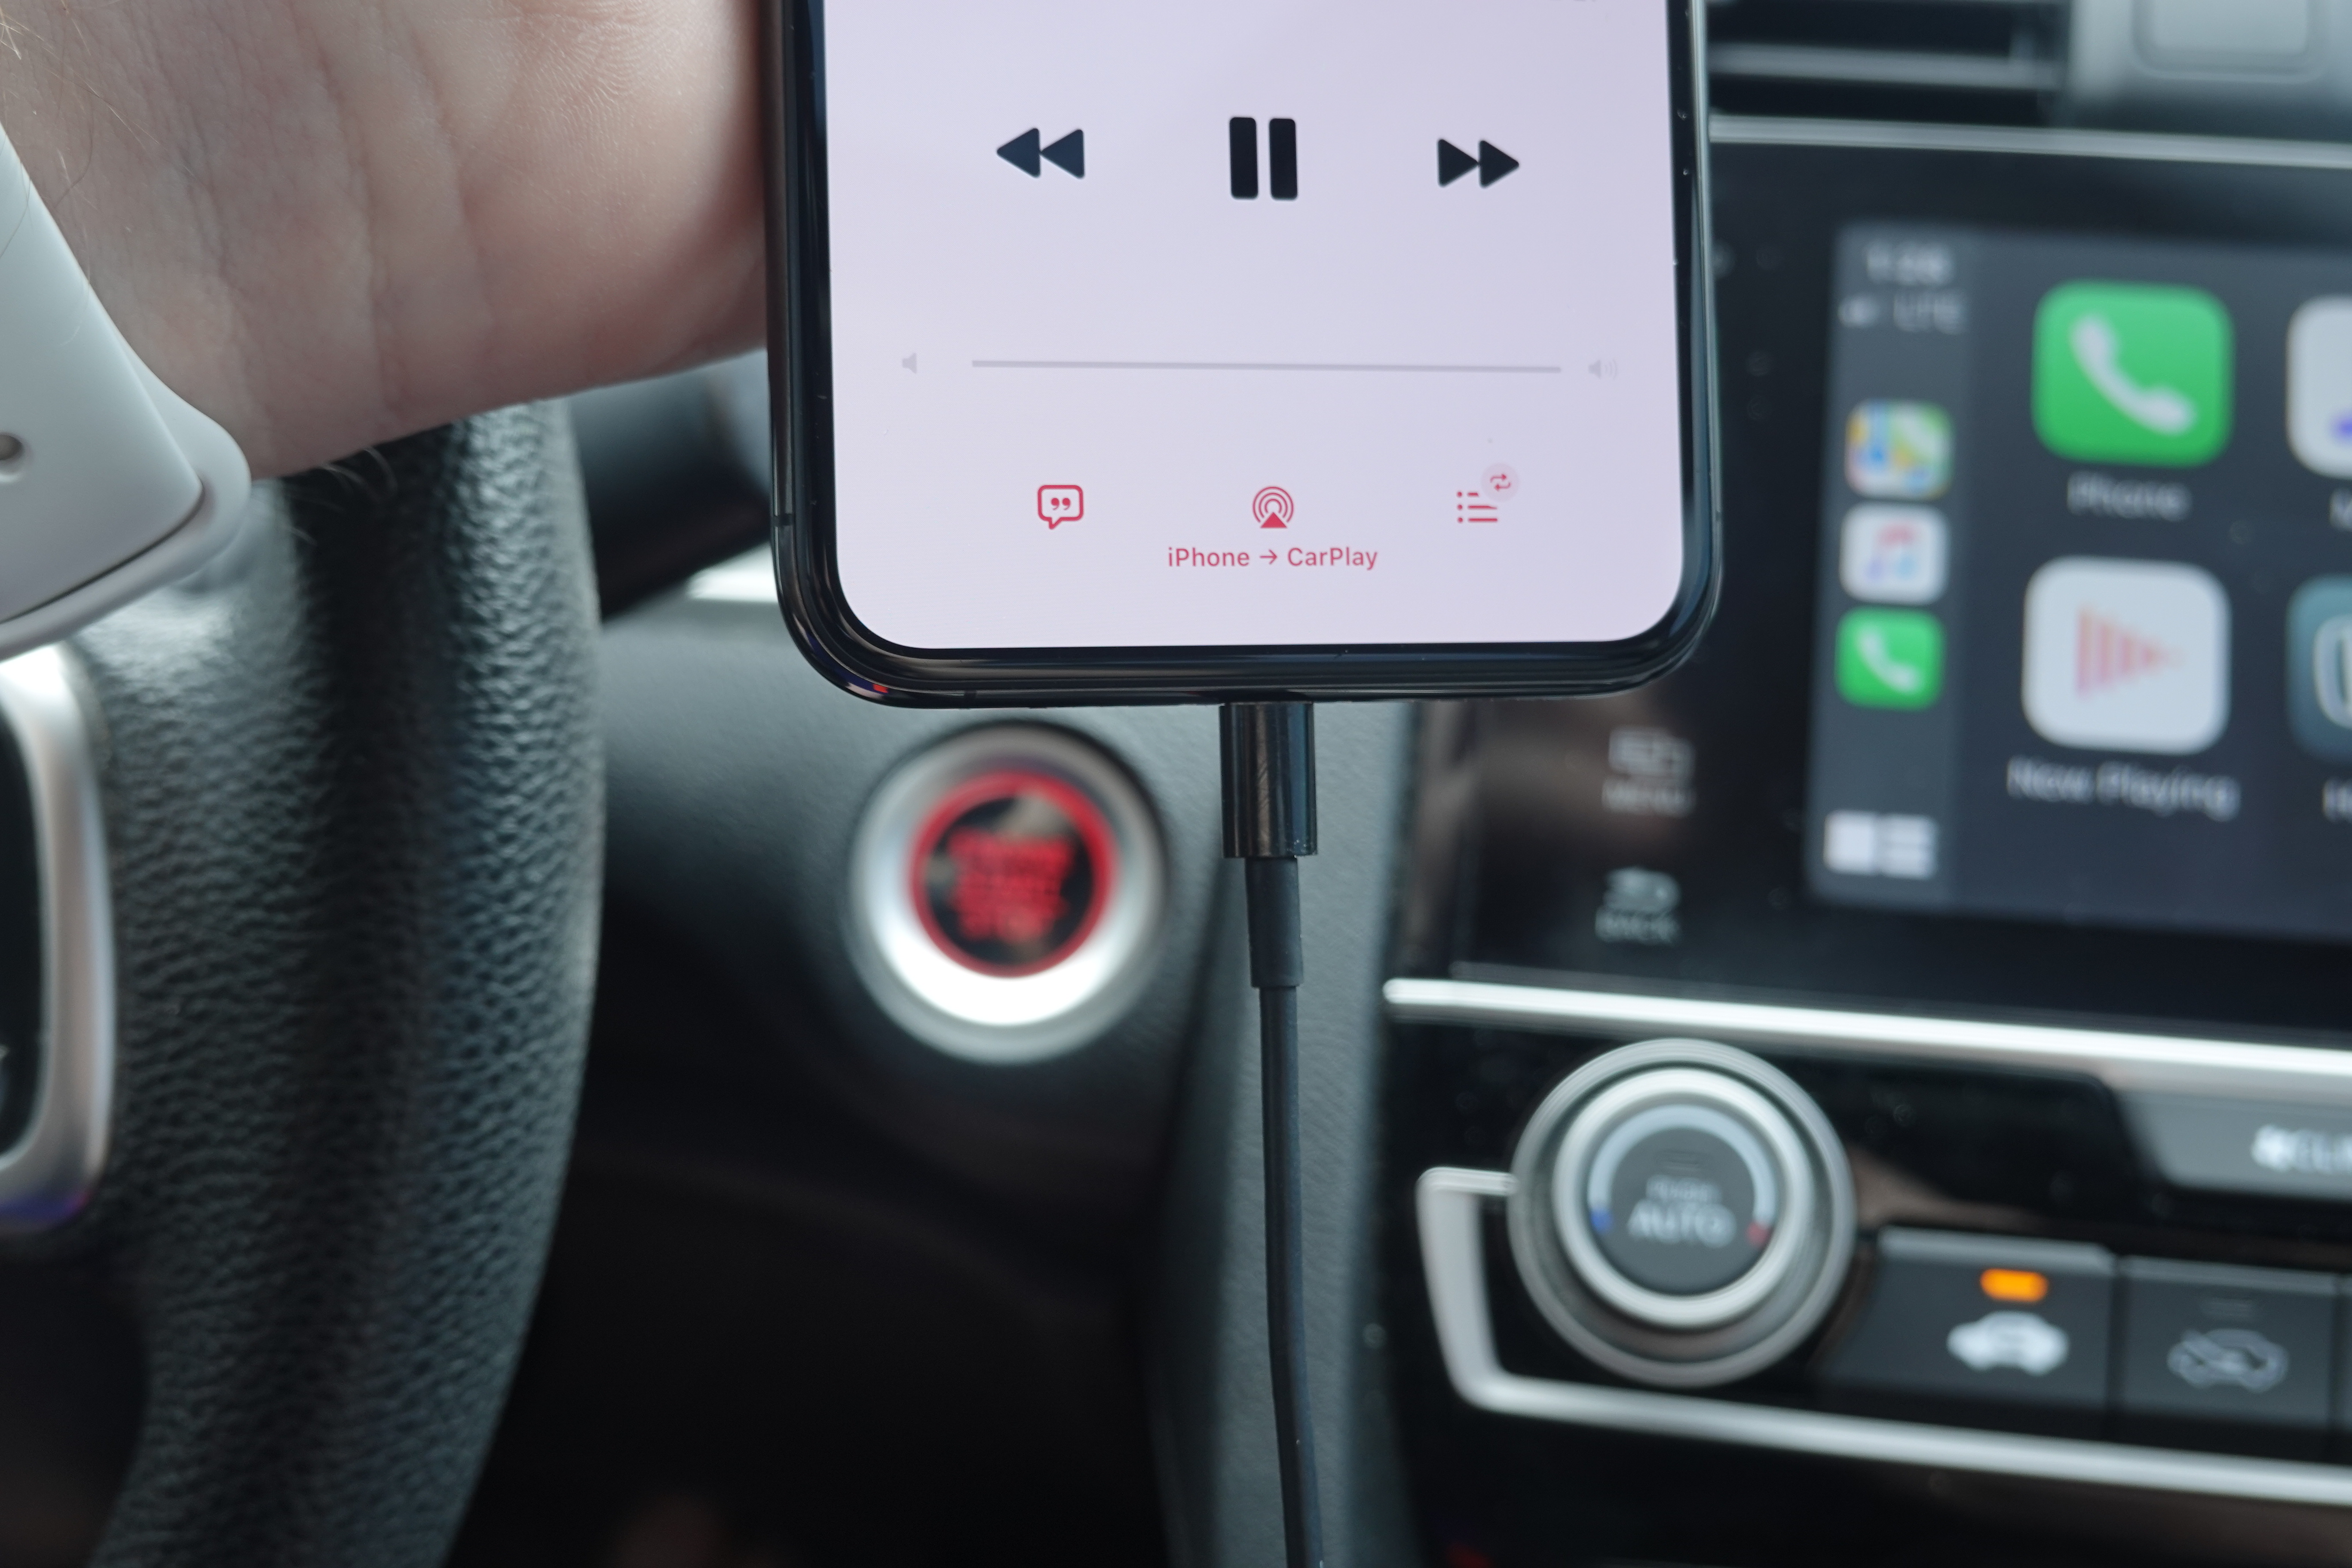 HexaCharge magnetic charging mount converts wired CarPlay